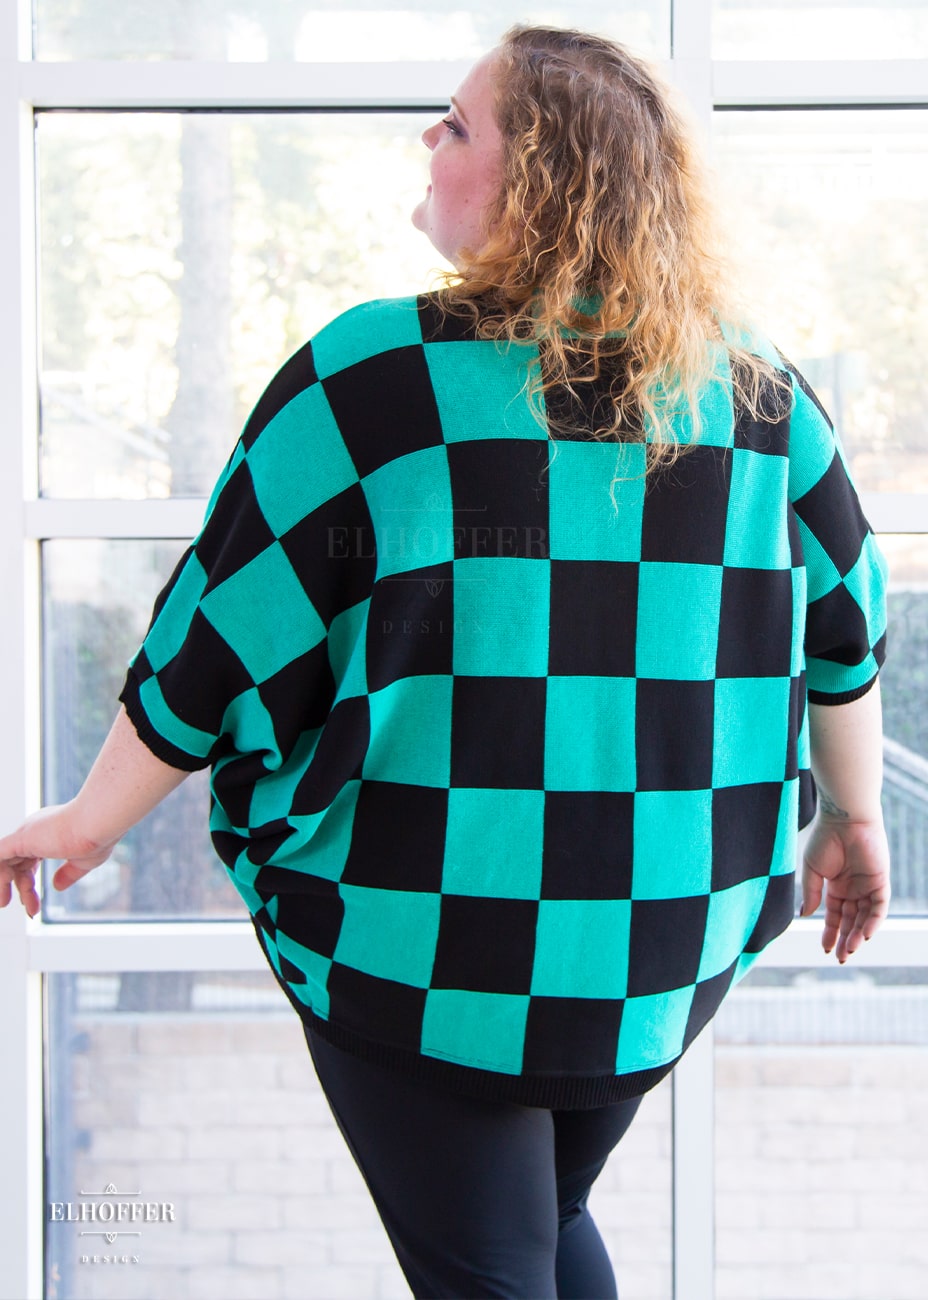 Bee is modeling the Sample XL-3XL. She has a 56” Chest, 53.5” Waist, 61” Hips, and is 5’8.